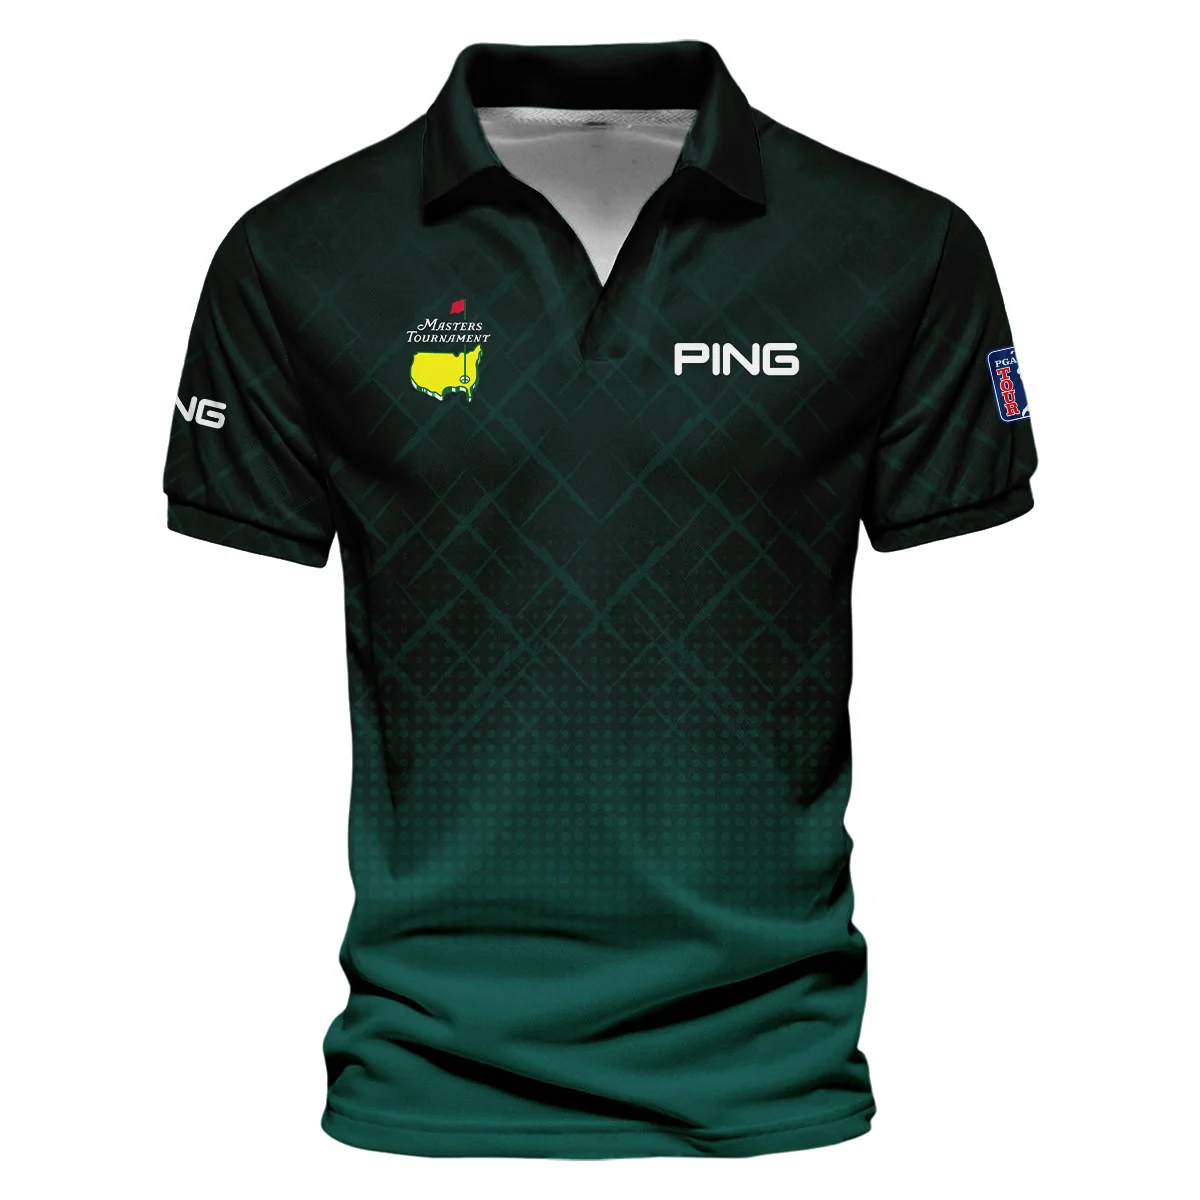 Ping Masters Tournament Sport Jersey Pattern Dark Green Vneck Polo Shirt Style Classic Polo Shirt For Men